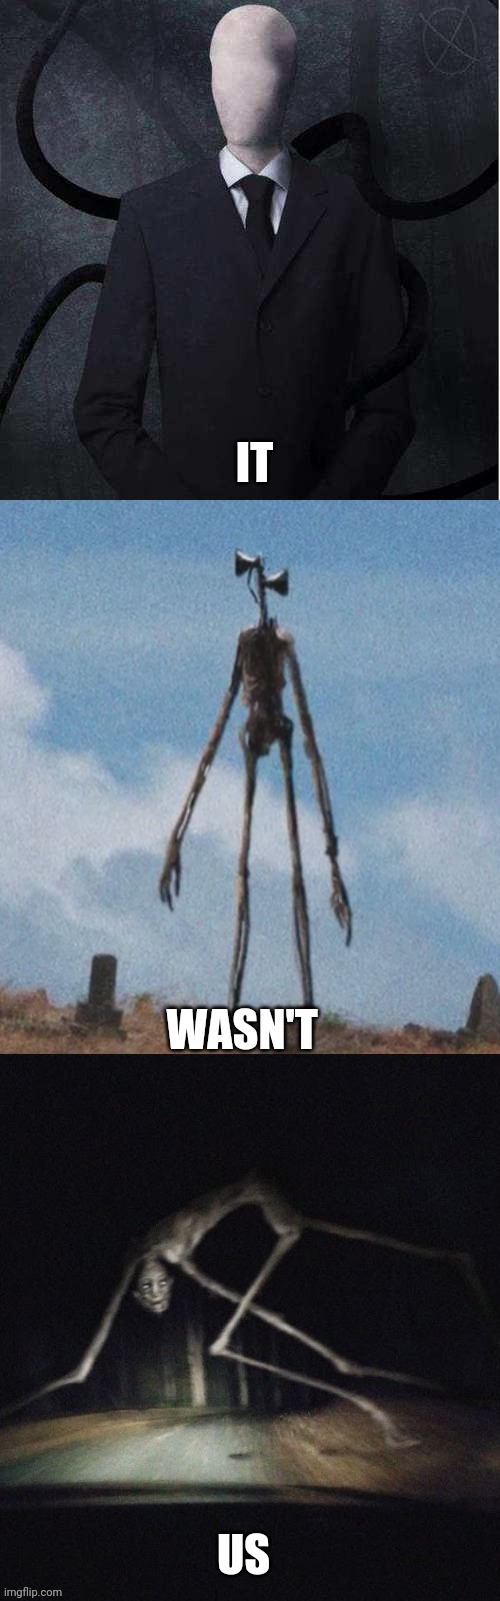 IT WASN'T US | image tagged in memes,slenderman,siren head,country road creature | made w/ Imgflip meme maker